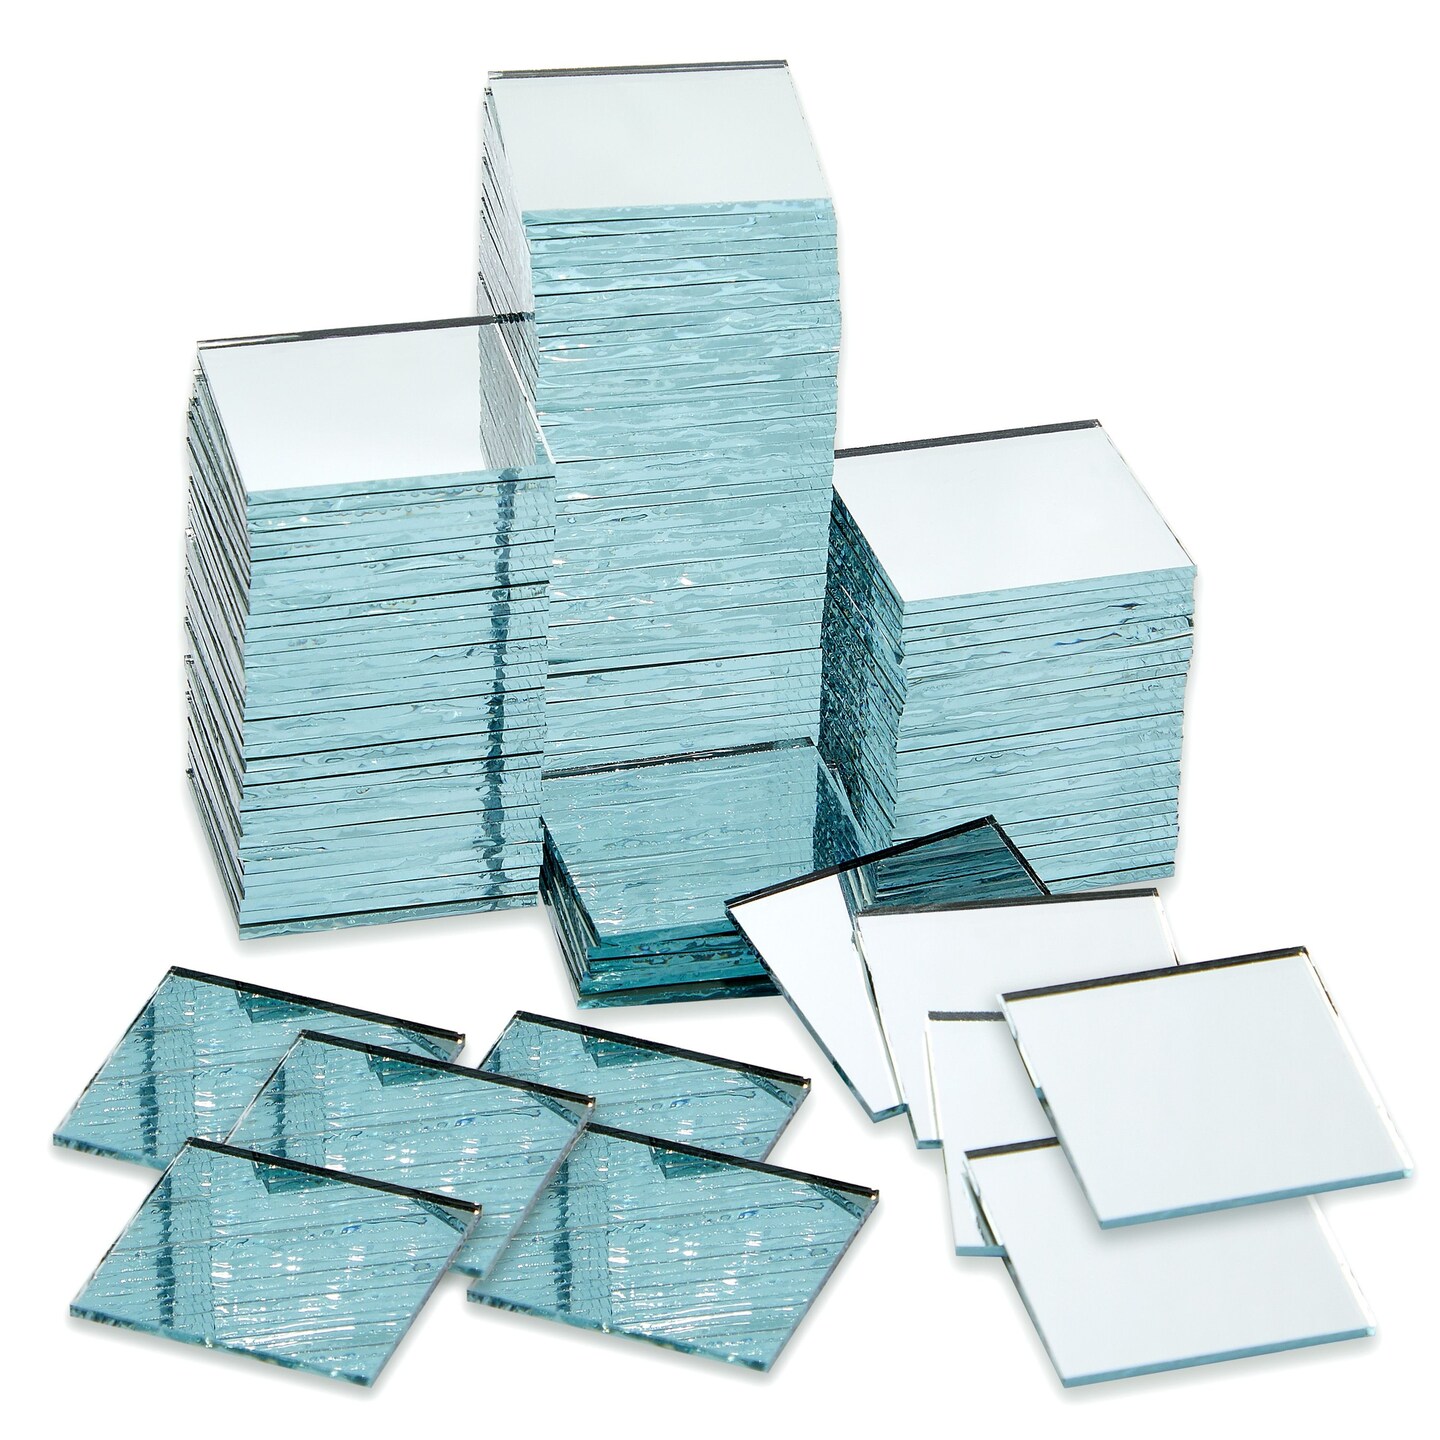 120 Pieces Mini Square 1 Inch Small Mirror Tiles for Crafts